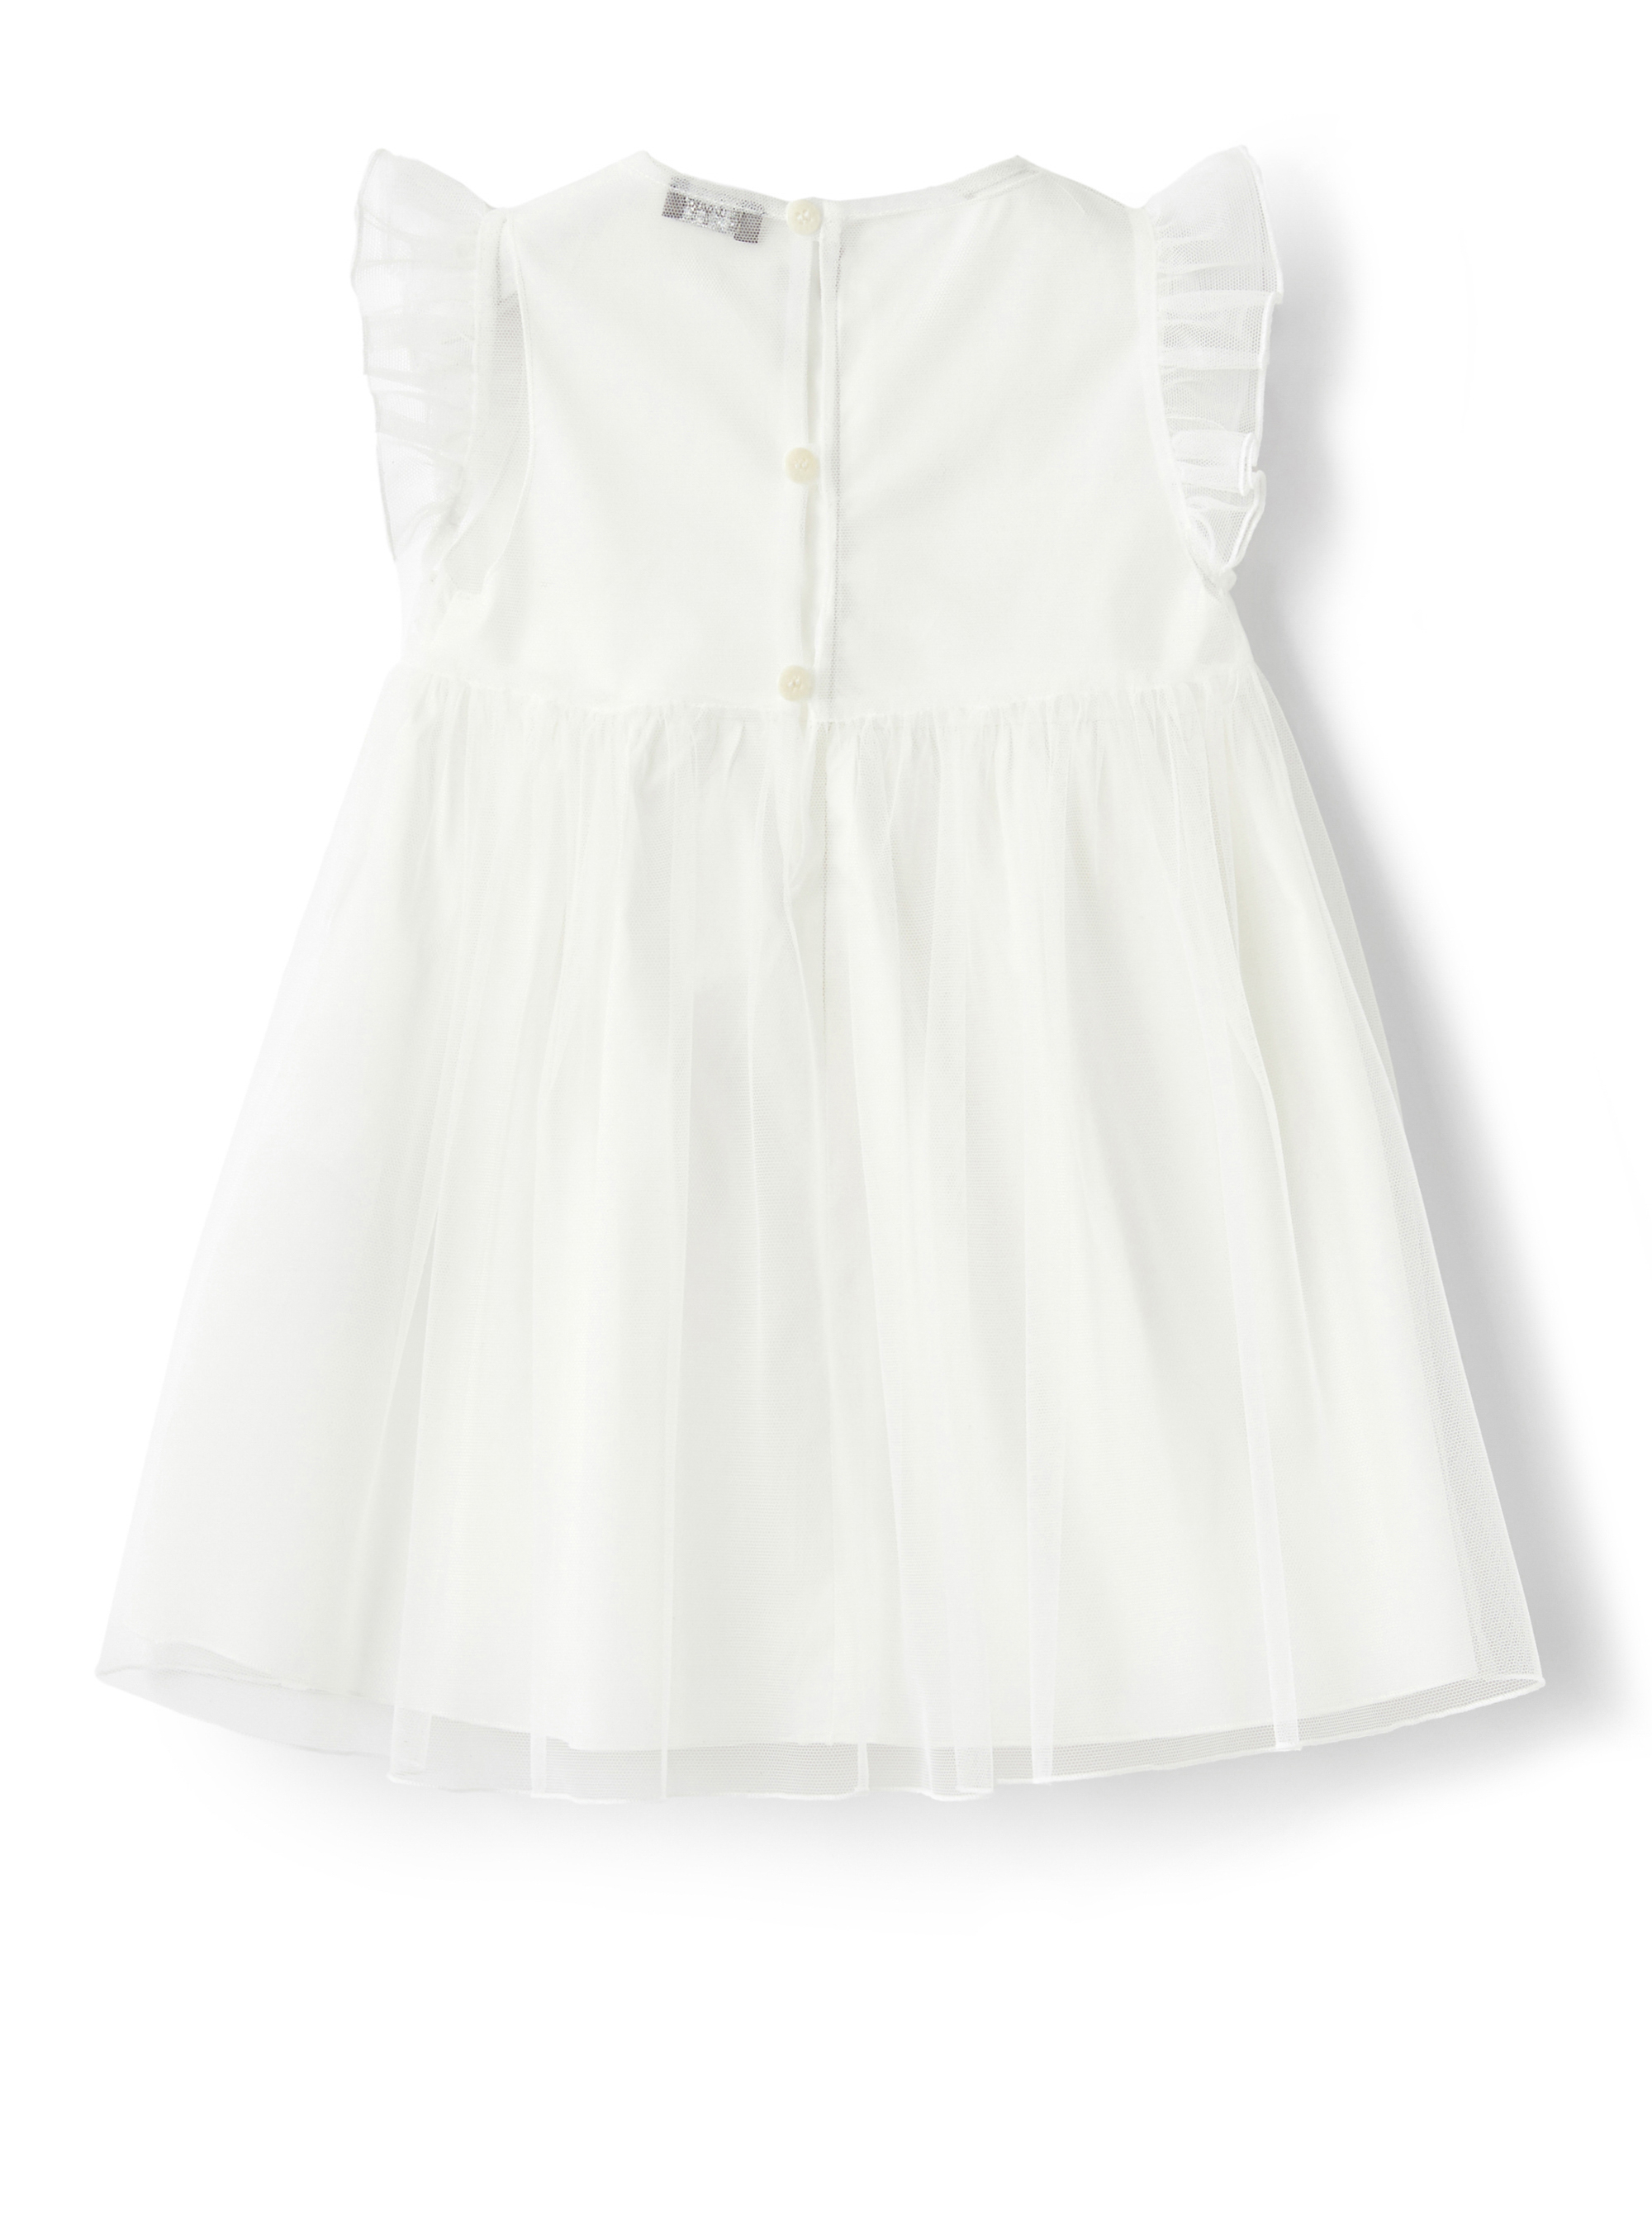 White tulle dress with flowers - White | Il Gufo